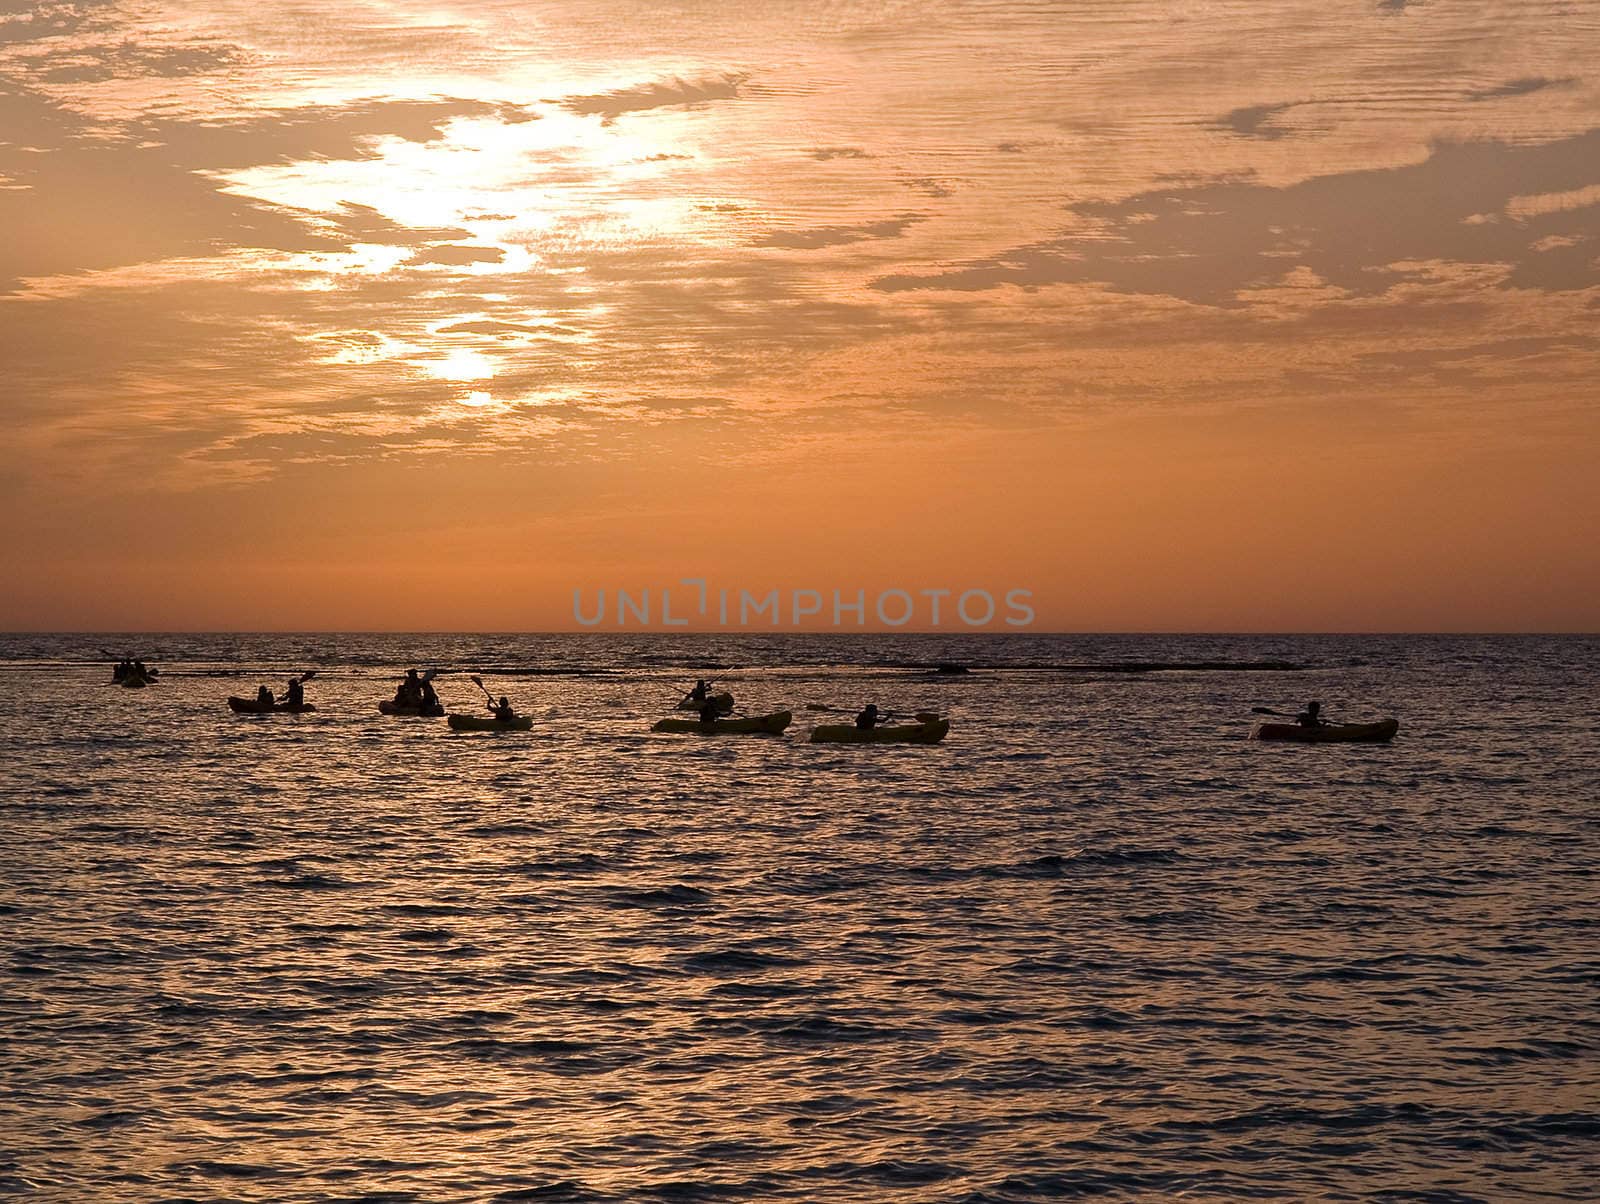 Wonderful seascape with kayaks in sunset perfect exteme sport background image